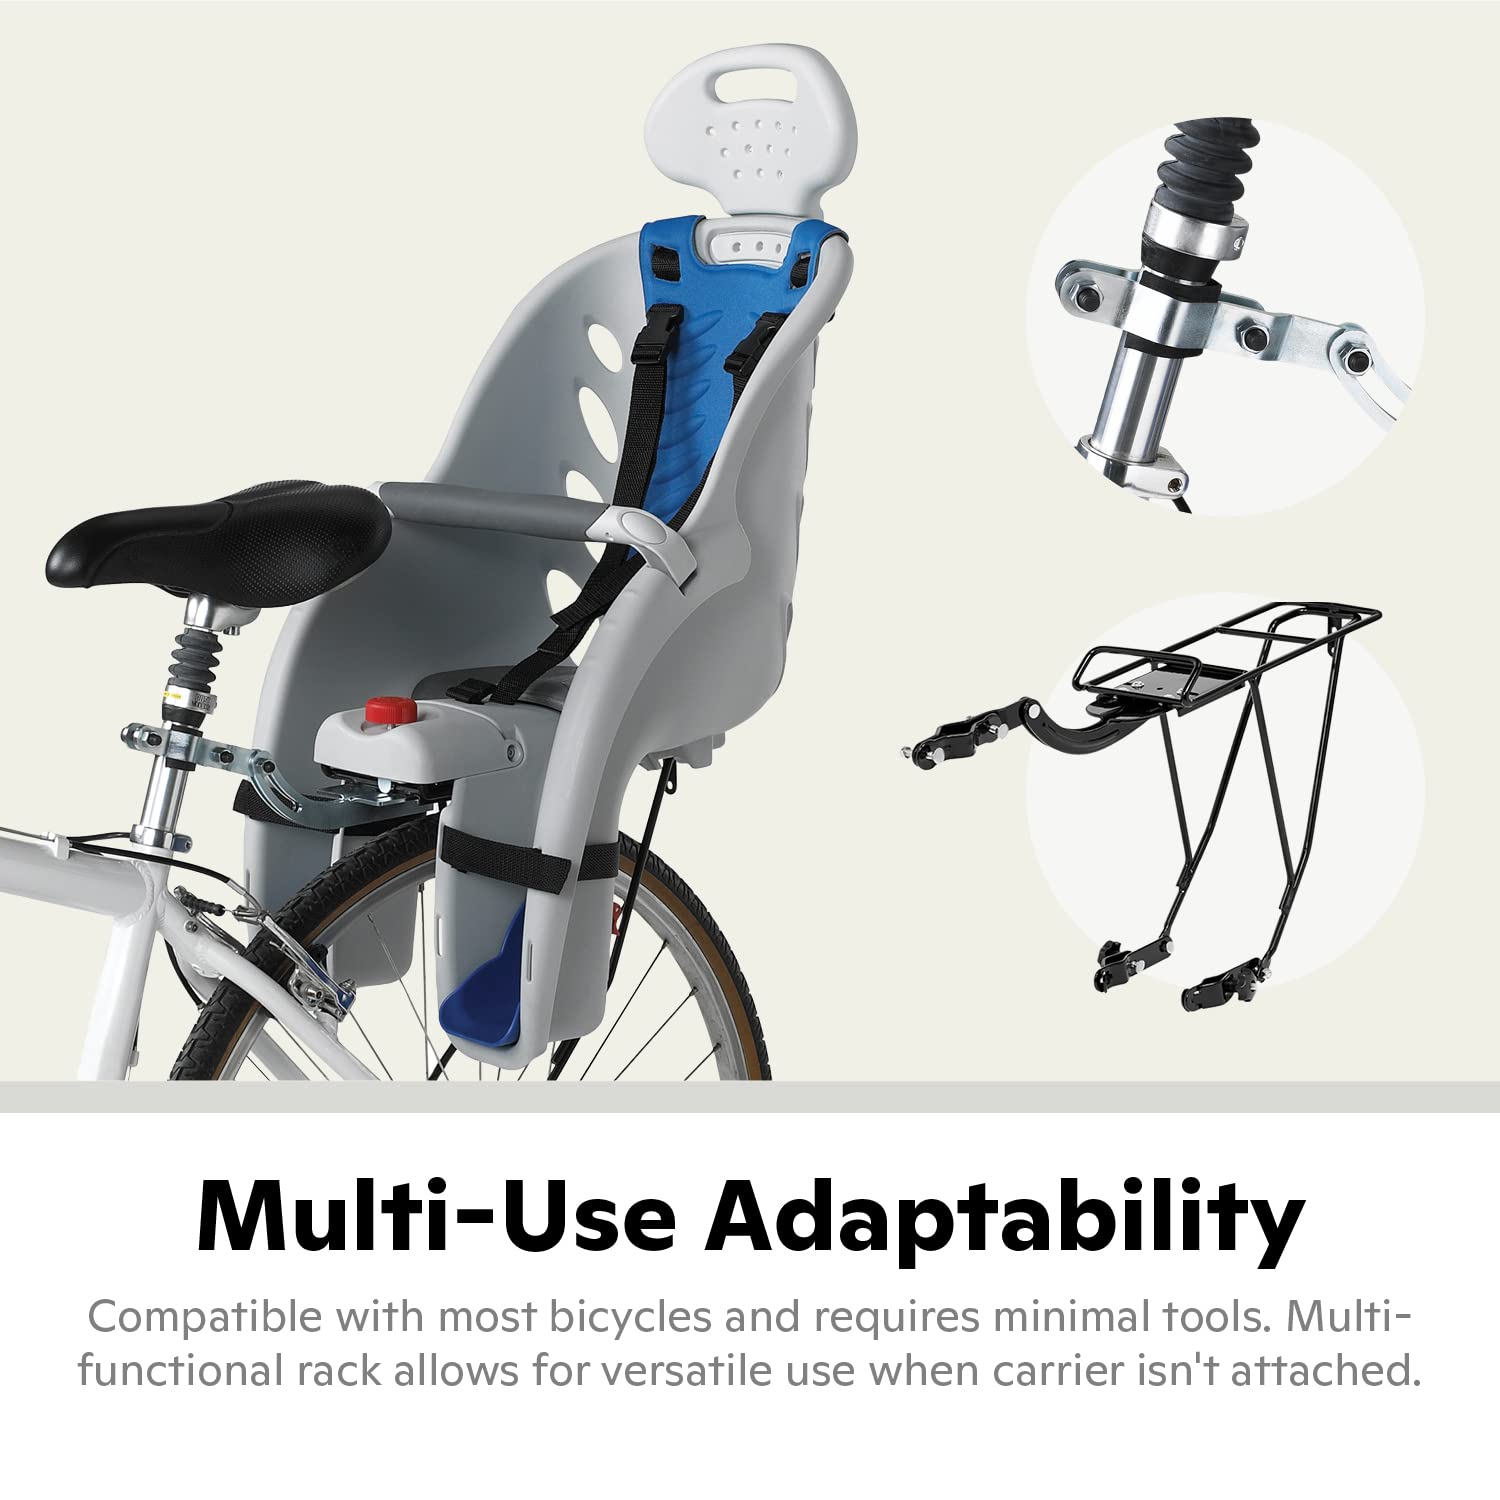 Schwinn Bicycle Mounted Child Carrier/Bike Seat for Children, Toddlers and Kids